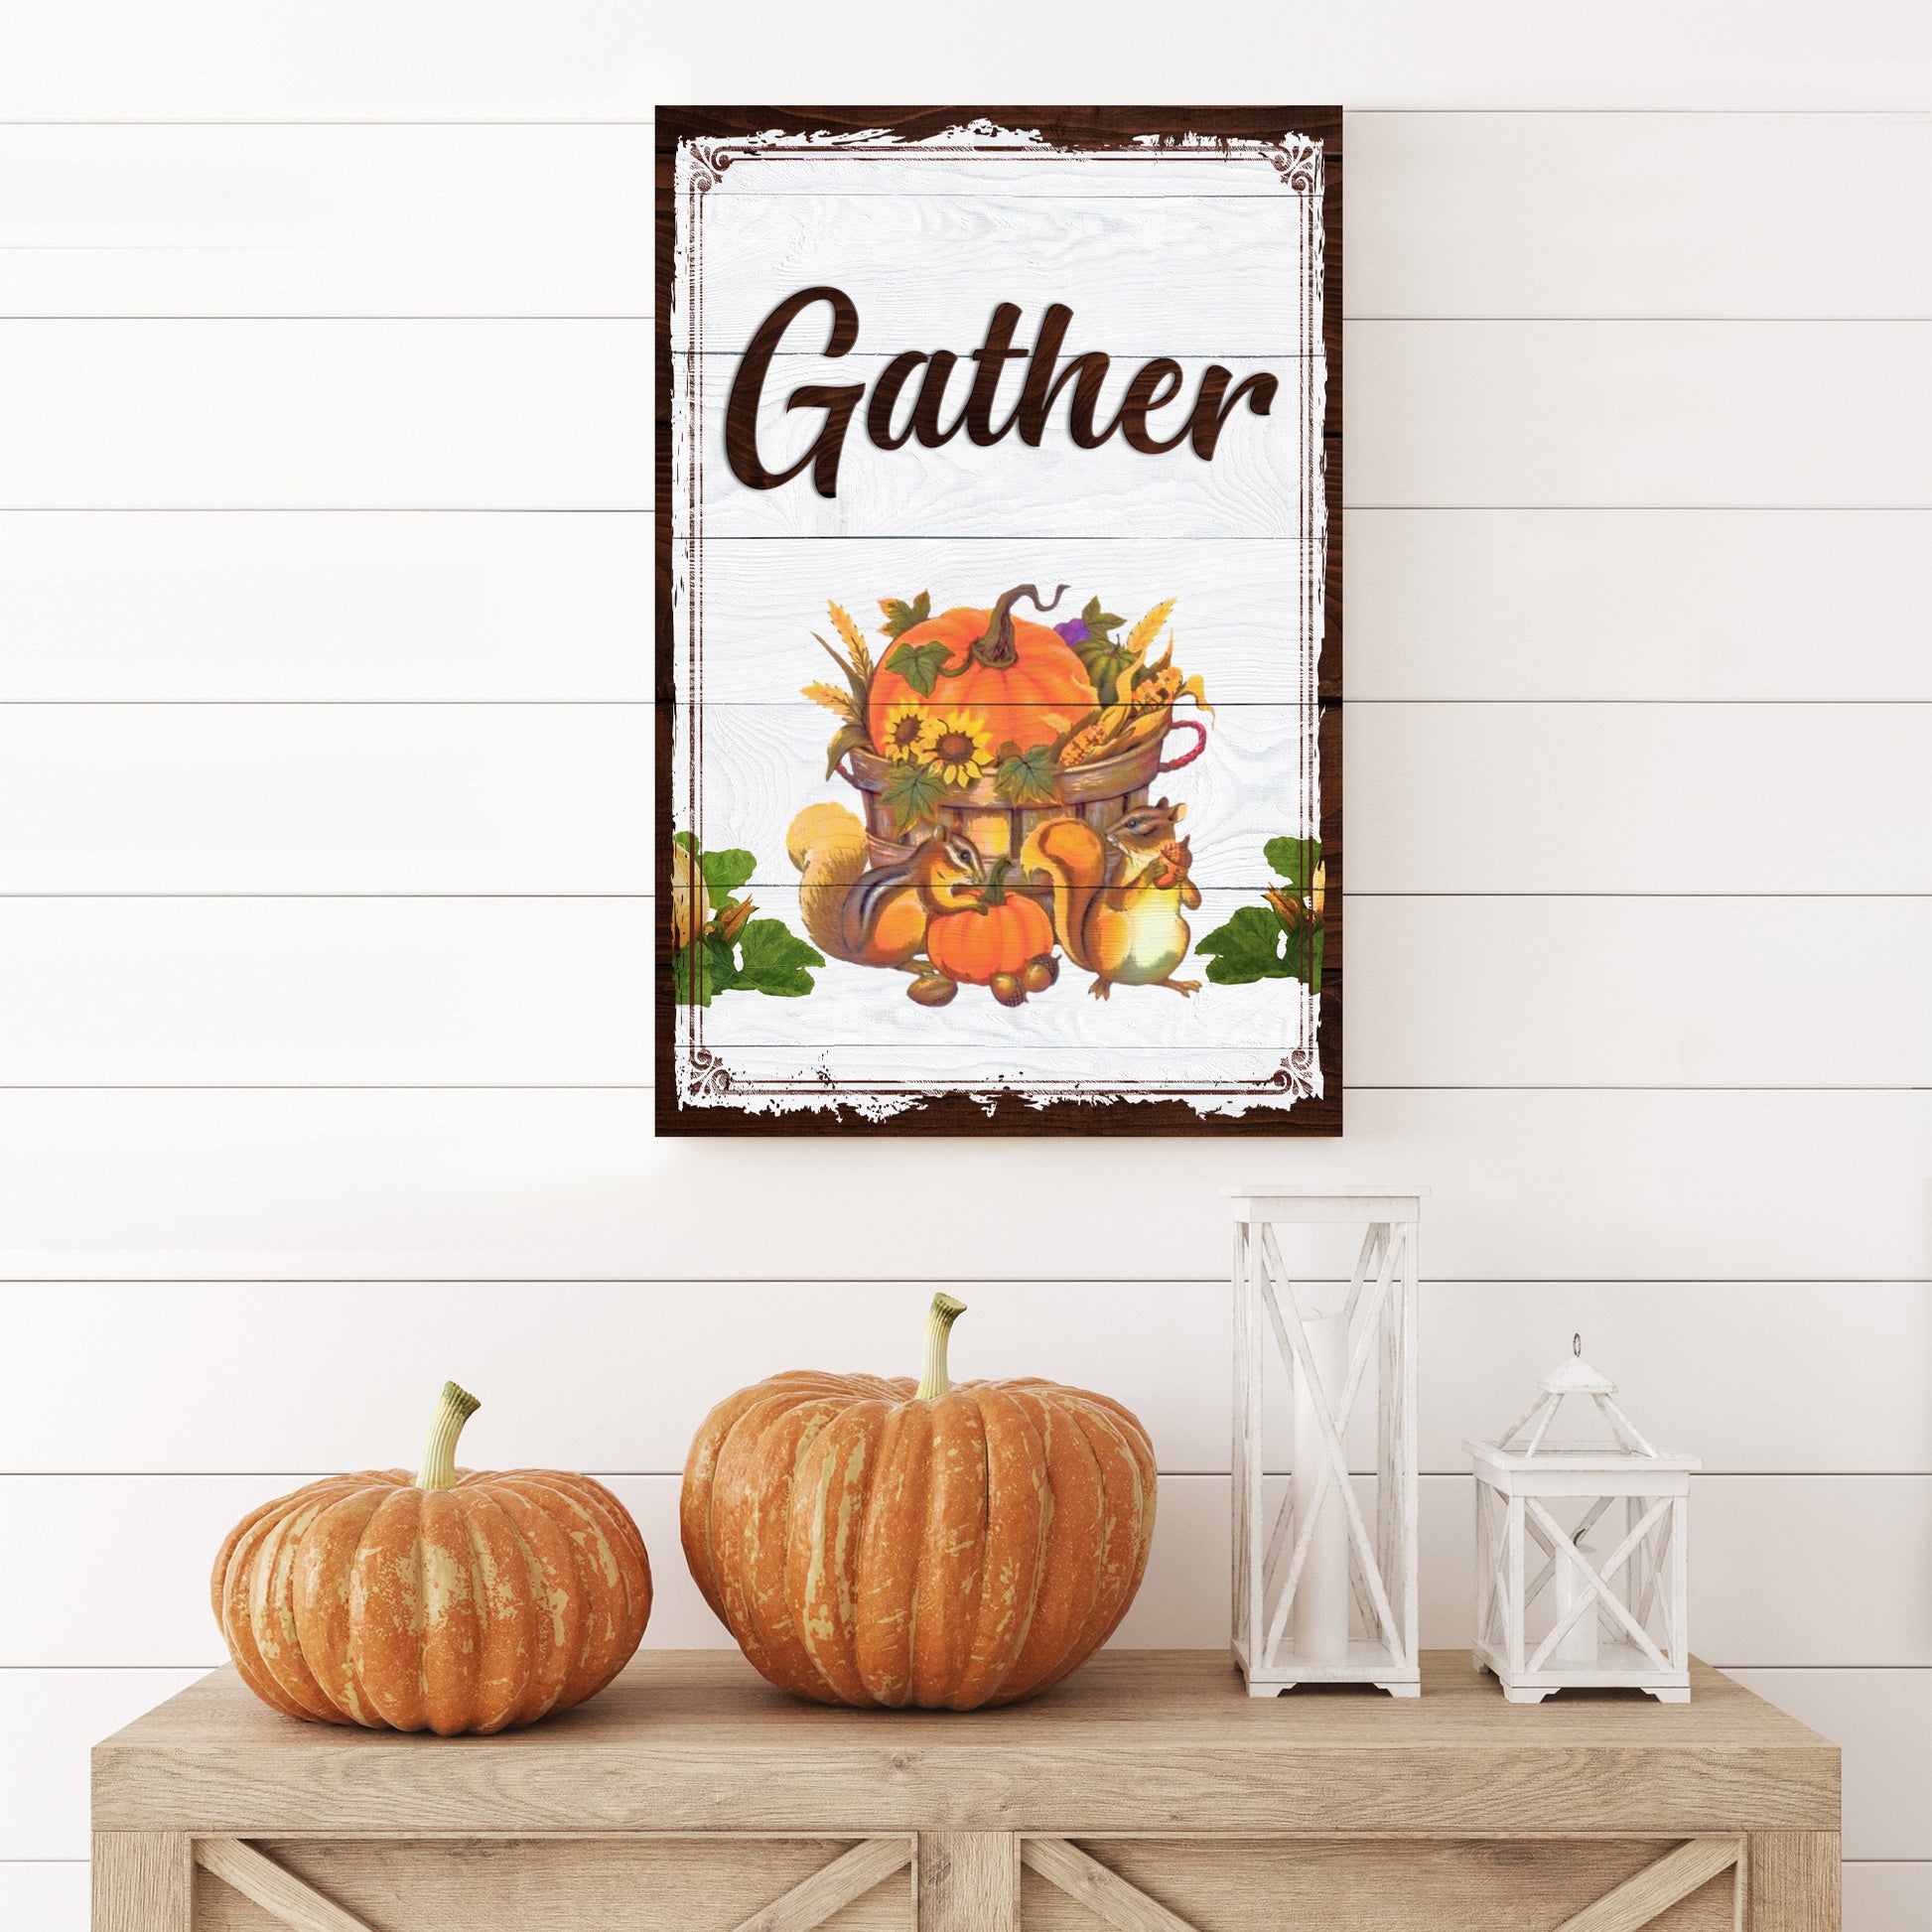 Gather Fall Sign - Image by Tailored Canvases